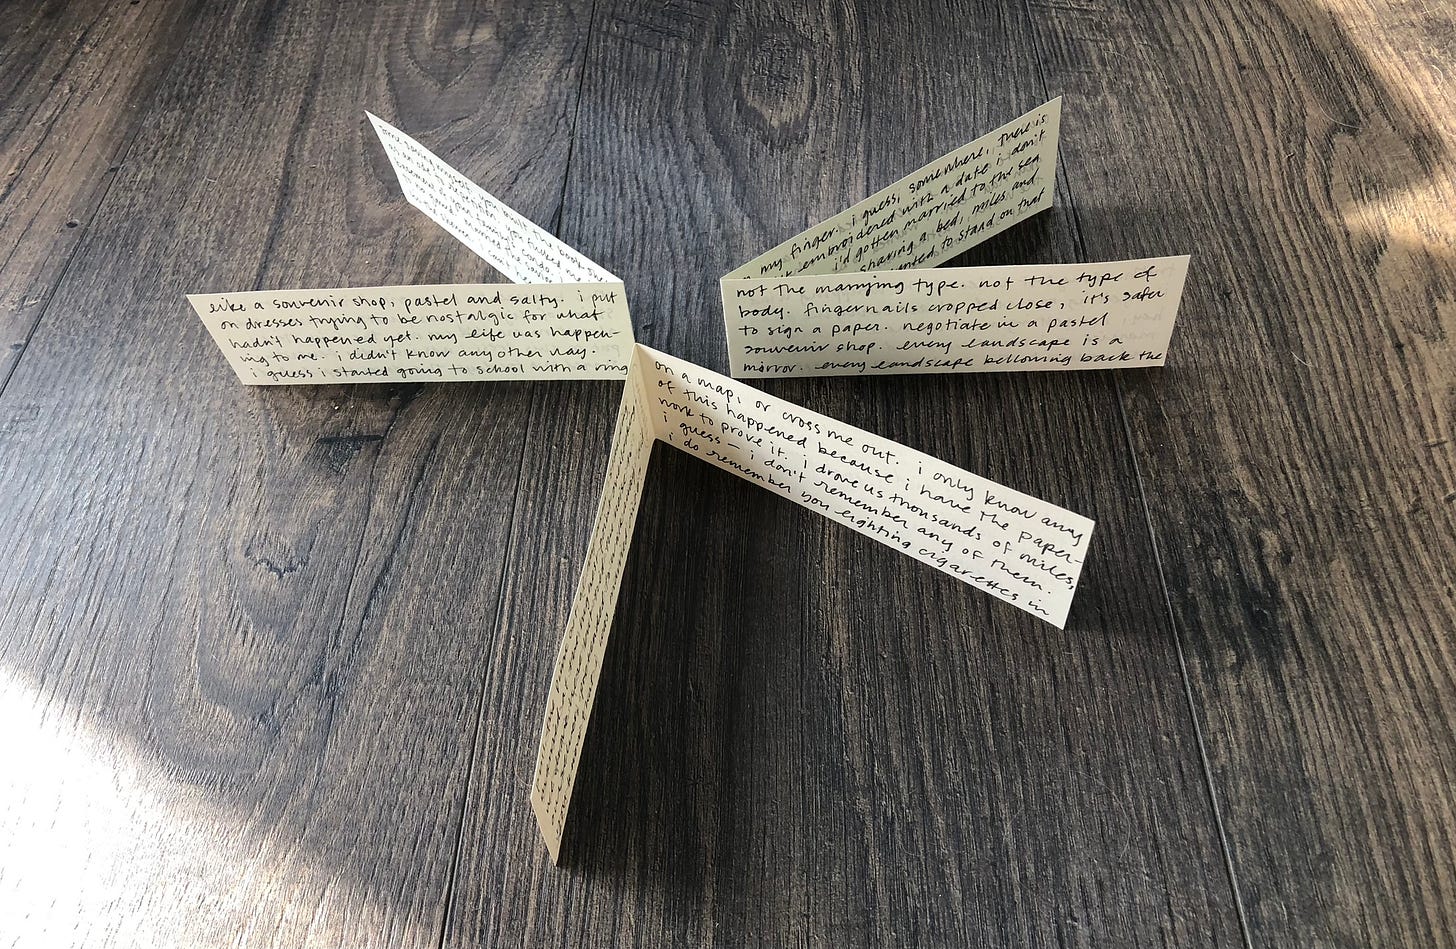 three folded scraps of paper with black ink handwriting standing in a circle on a wooden floor